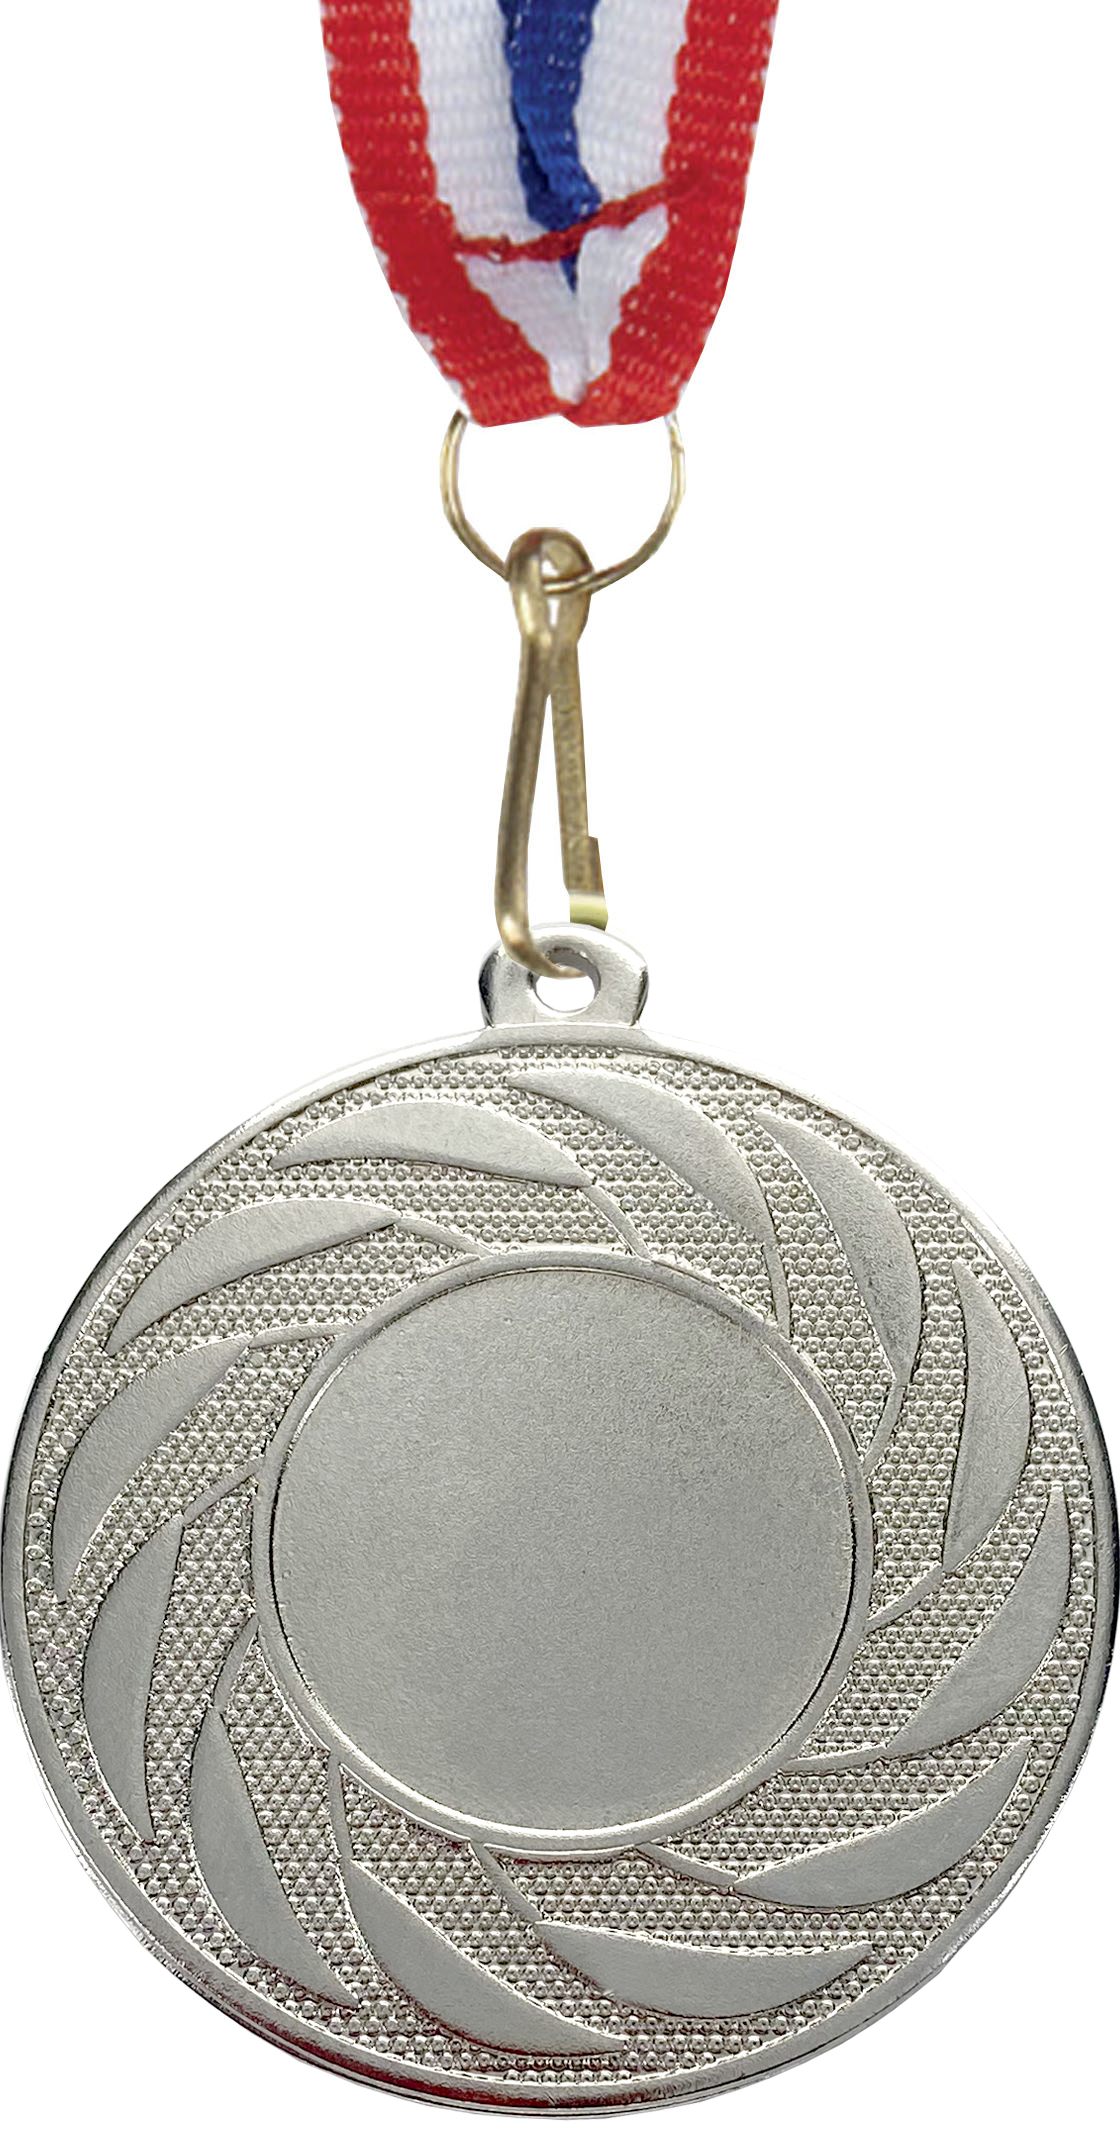 FREE ENGRAVING,CENTRES & RIBBONS 3 x SKIING MEDALS GOLD,SILVER & BRONZE 50mm